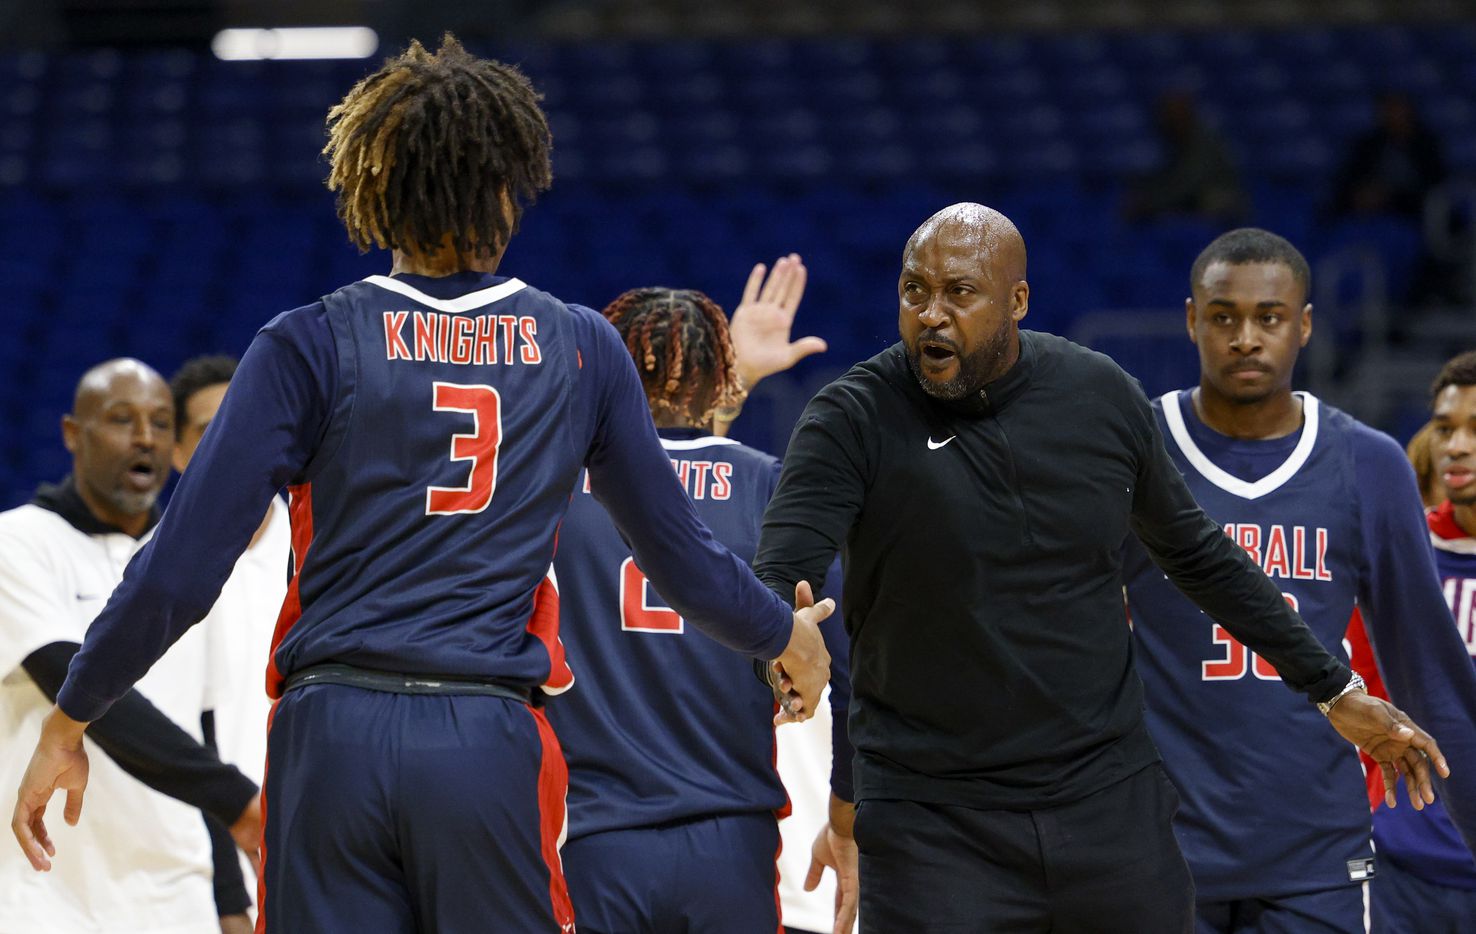 Kimball head coach Nicke Smith high-fives Kimball guard Chauncey Gibson (3) during the first...